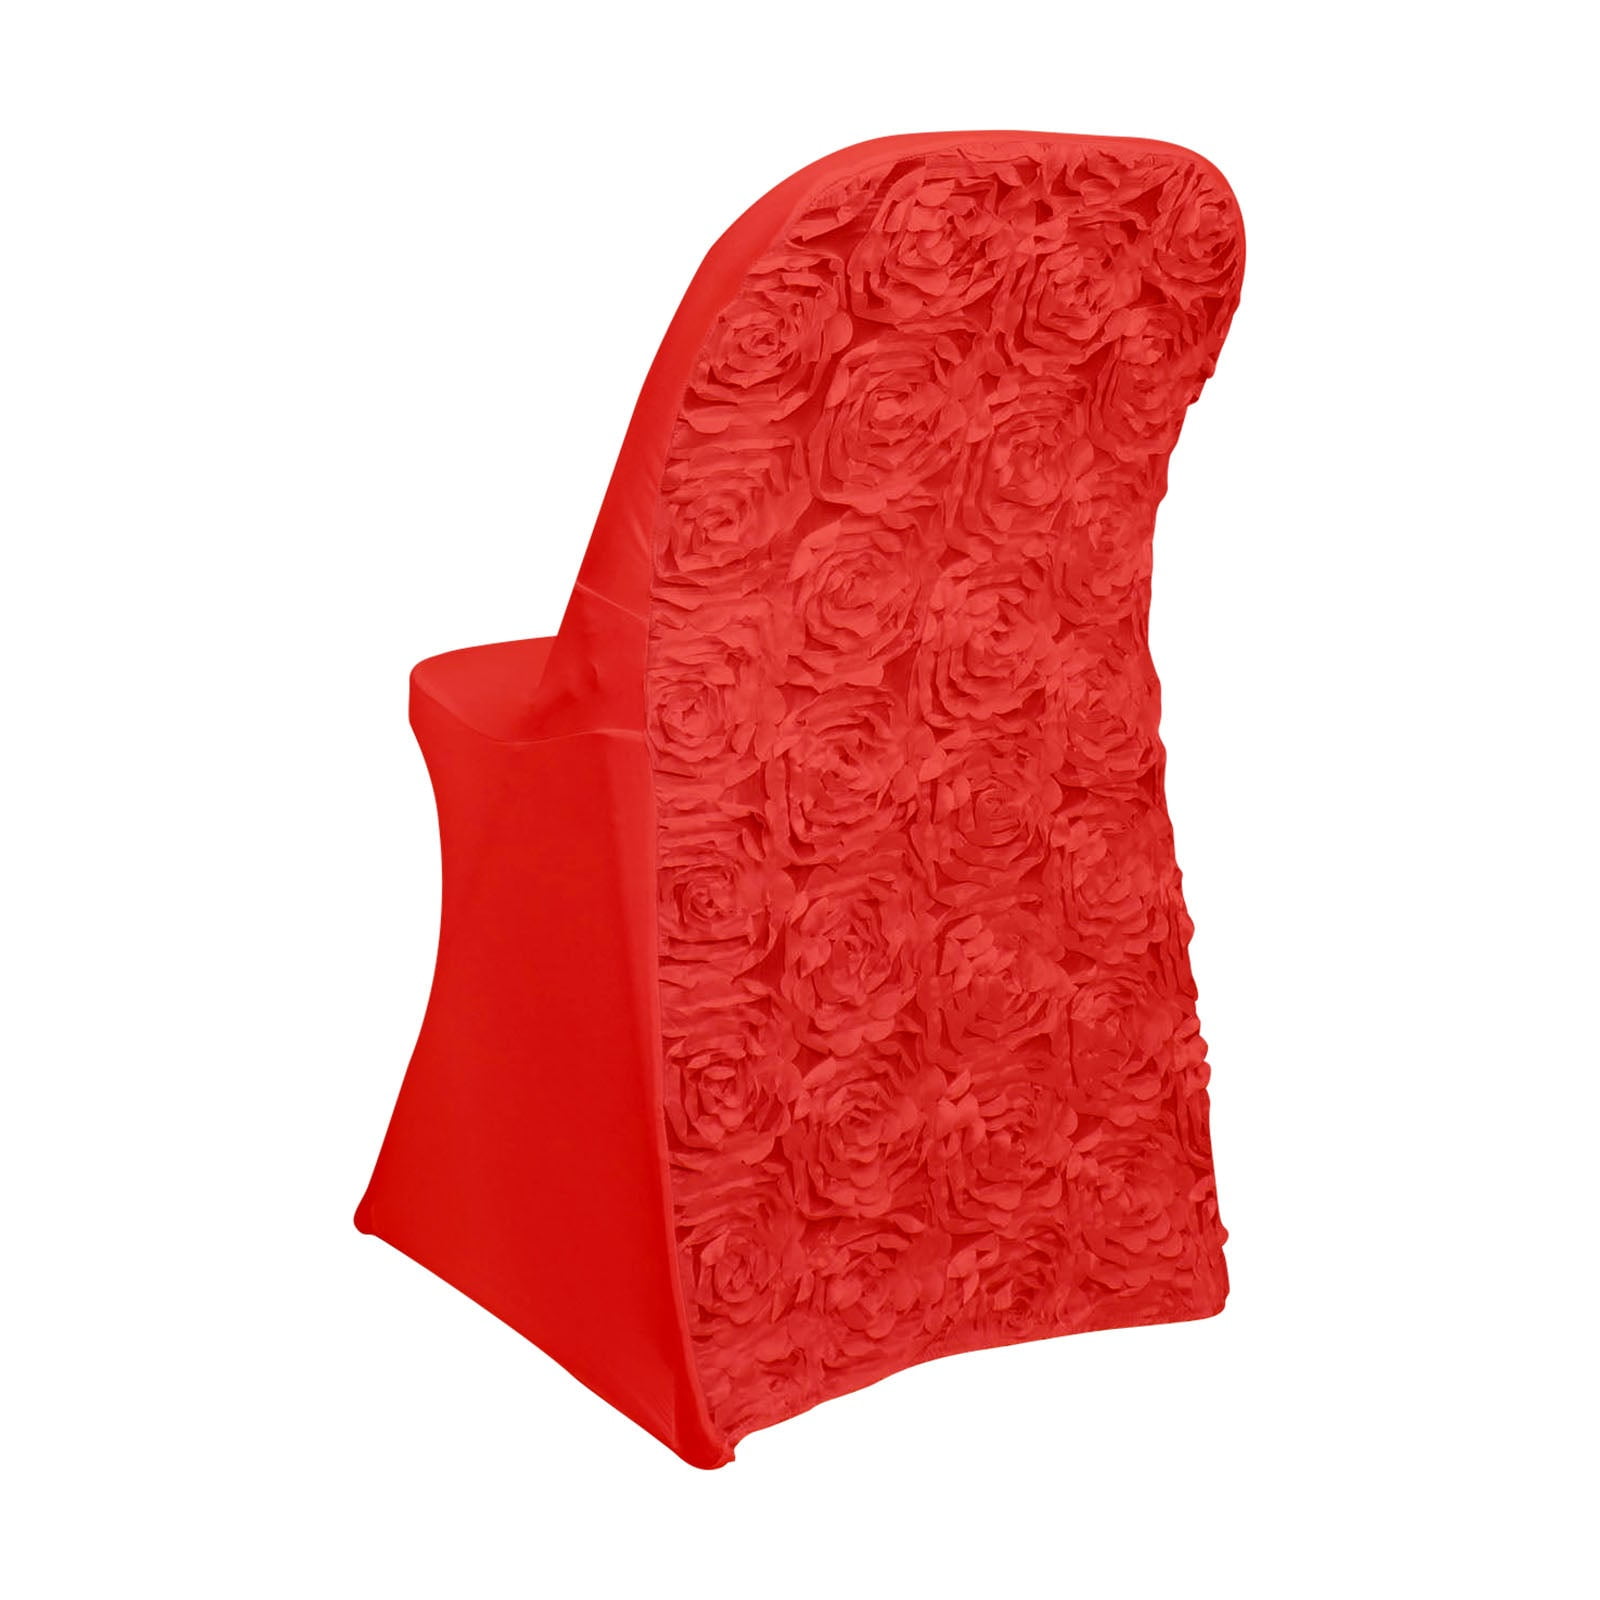 200 GSM Grade A Quality Folding Chair Cover By Eastern Mills - Spandex/Lycra  - Red